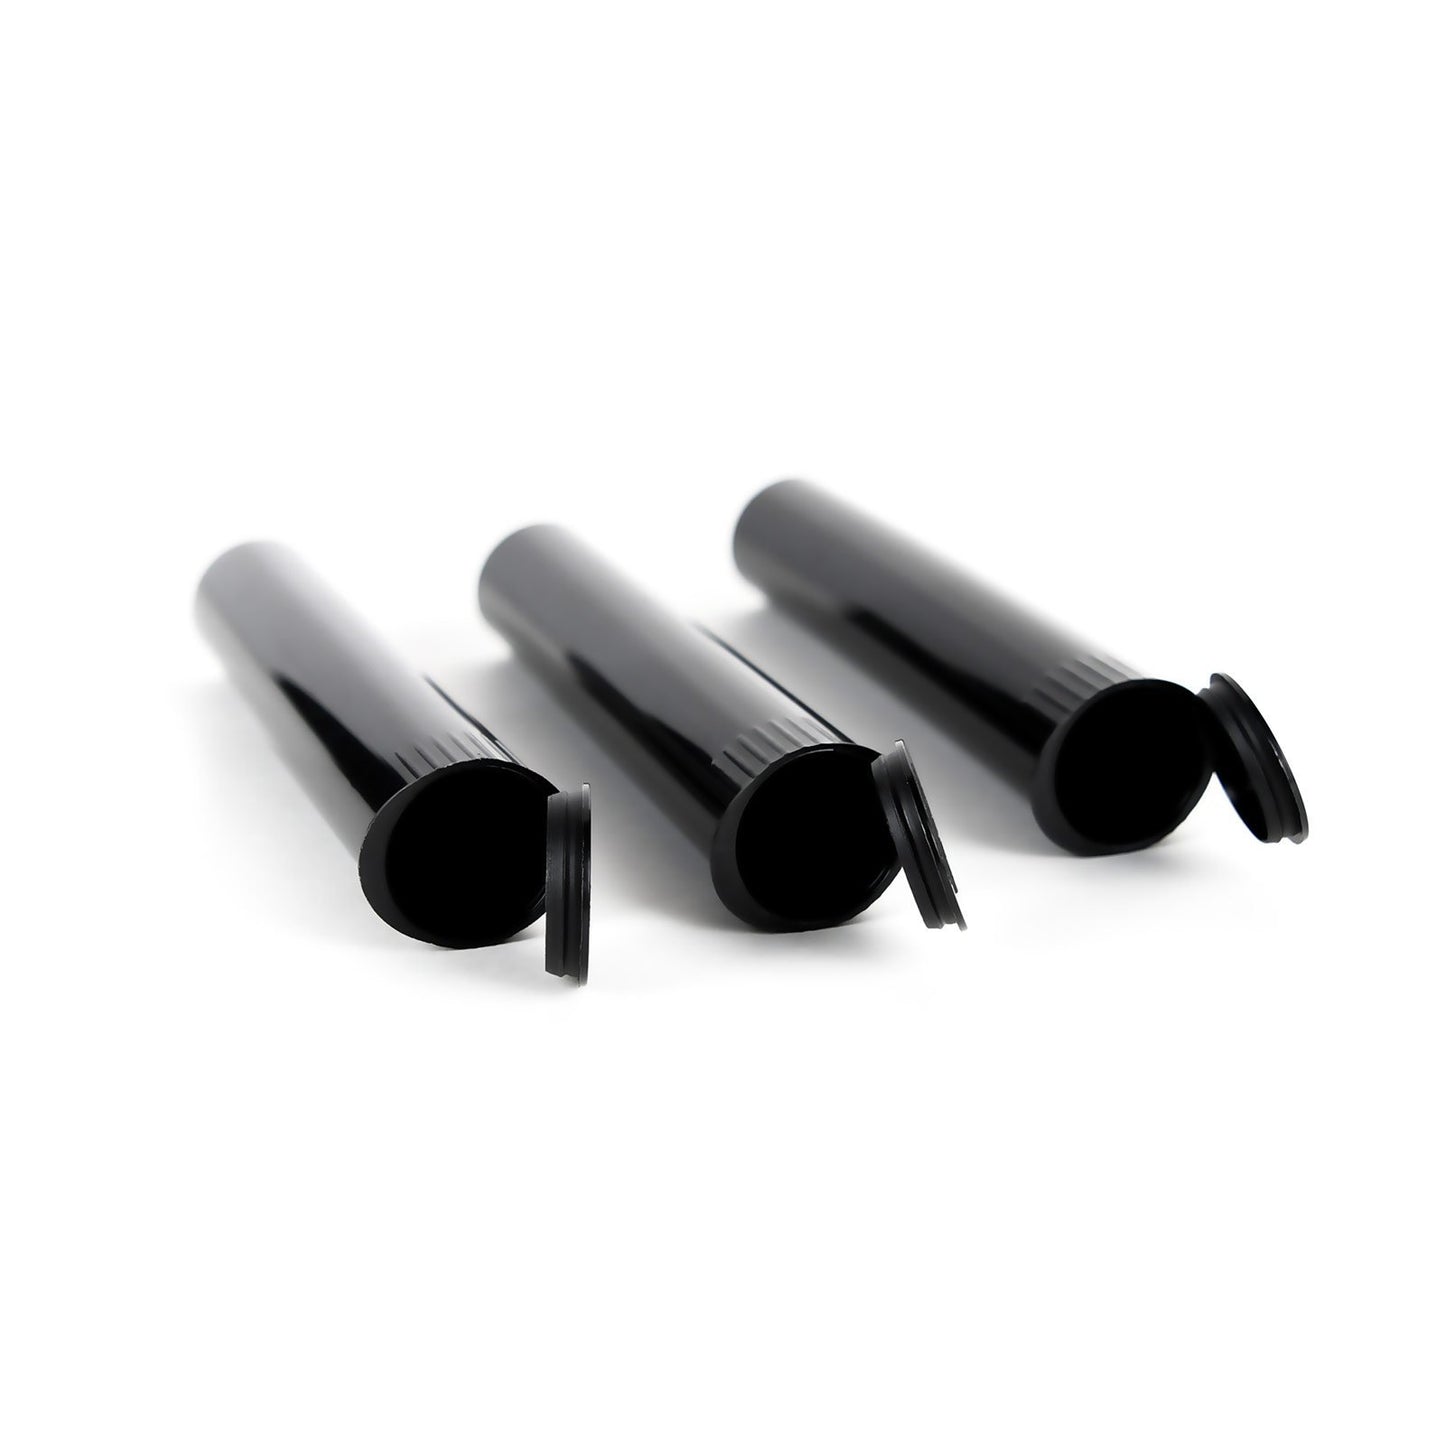 98mm Pre-Roll RX Squeeze Tubes Opaque Black - 700 Count at Flower Power Packages